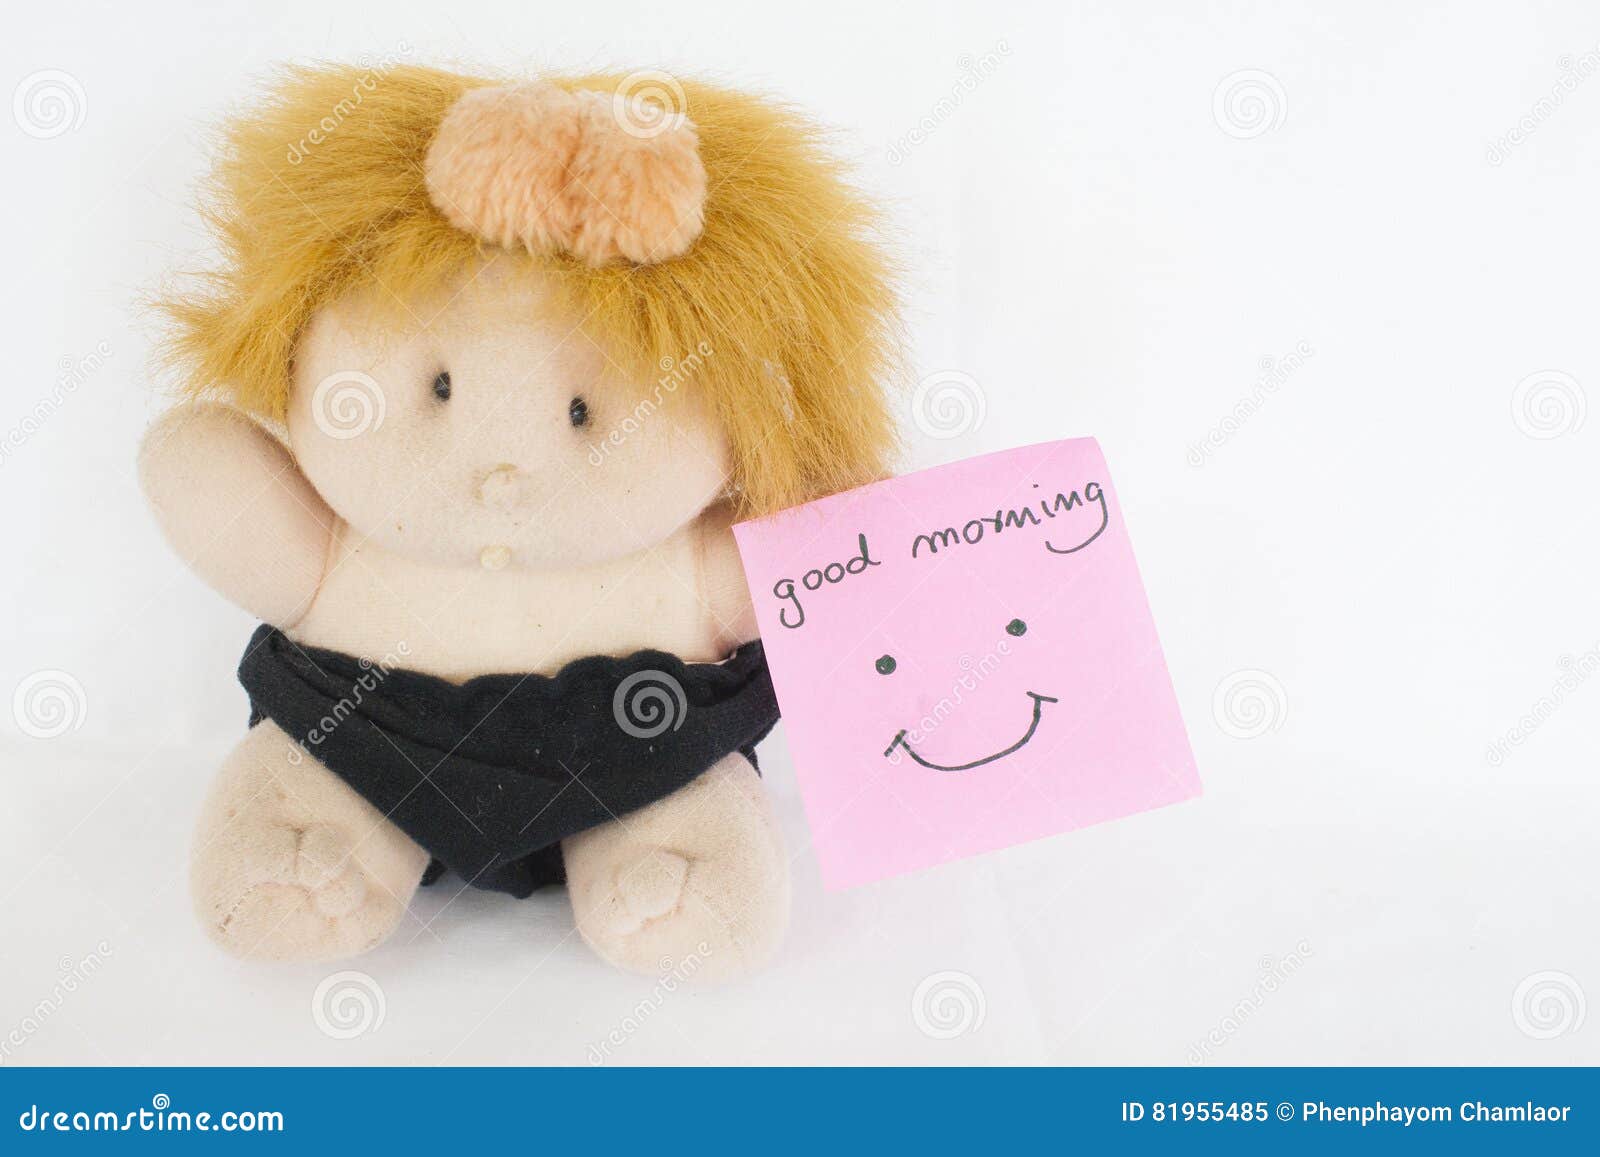 Messages Card and Baby Doll Stock Image - Image of plot, notepaper ...